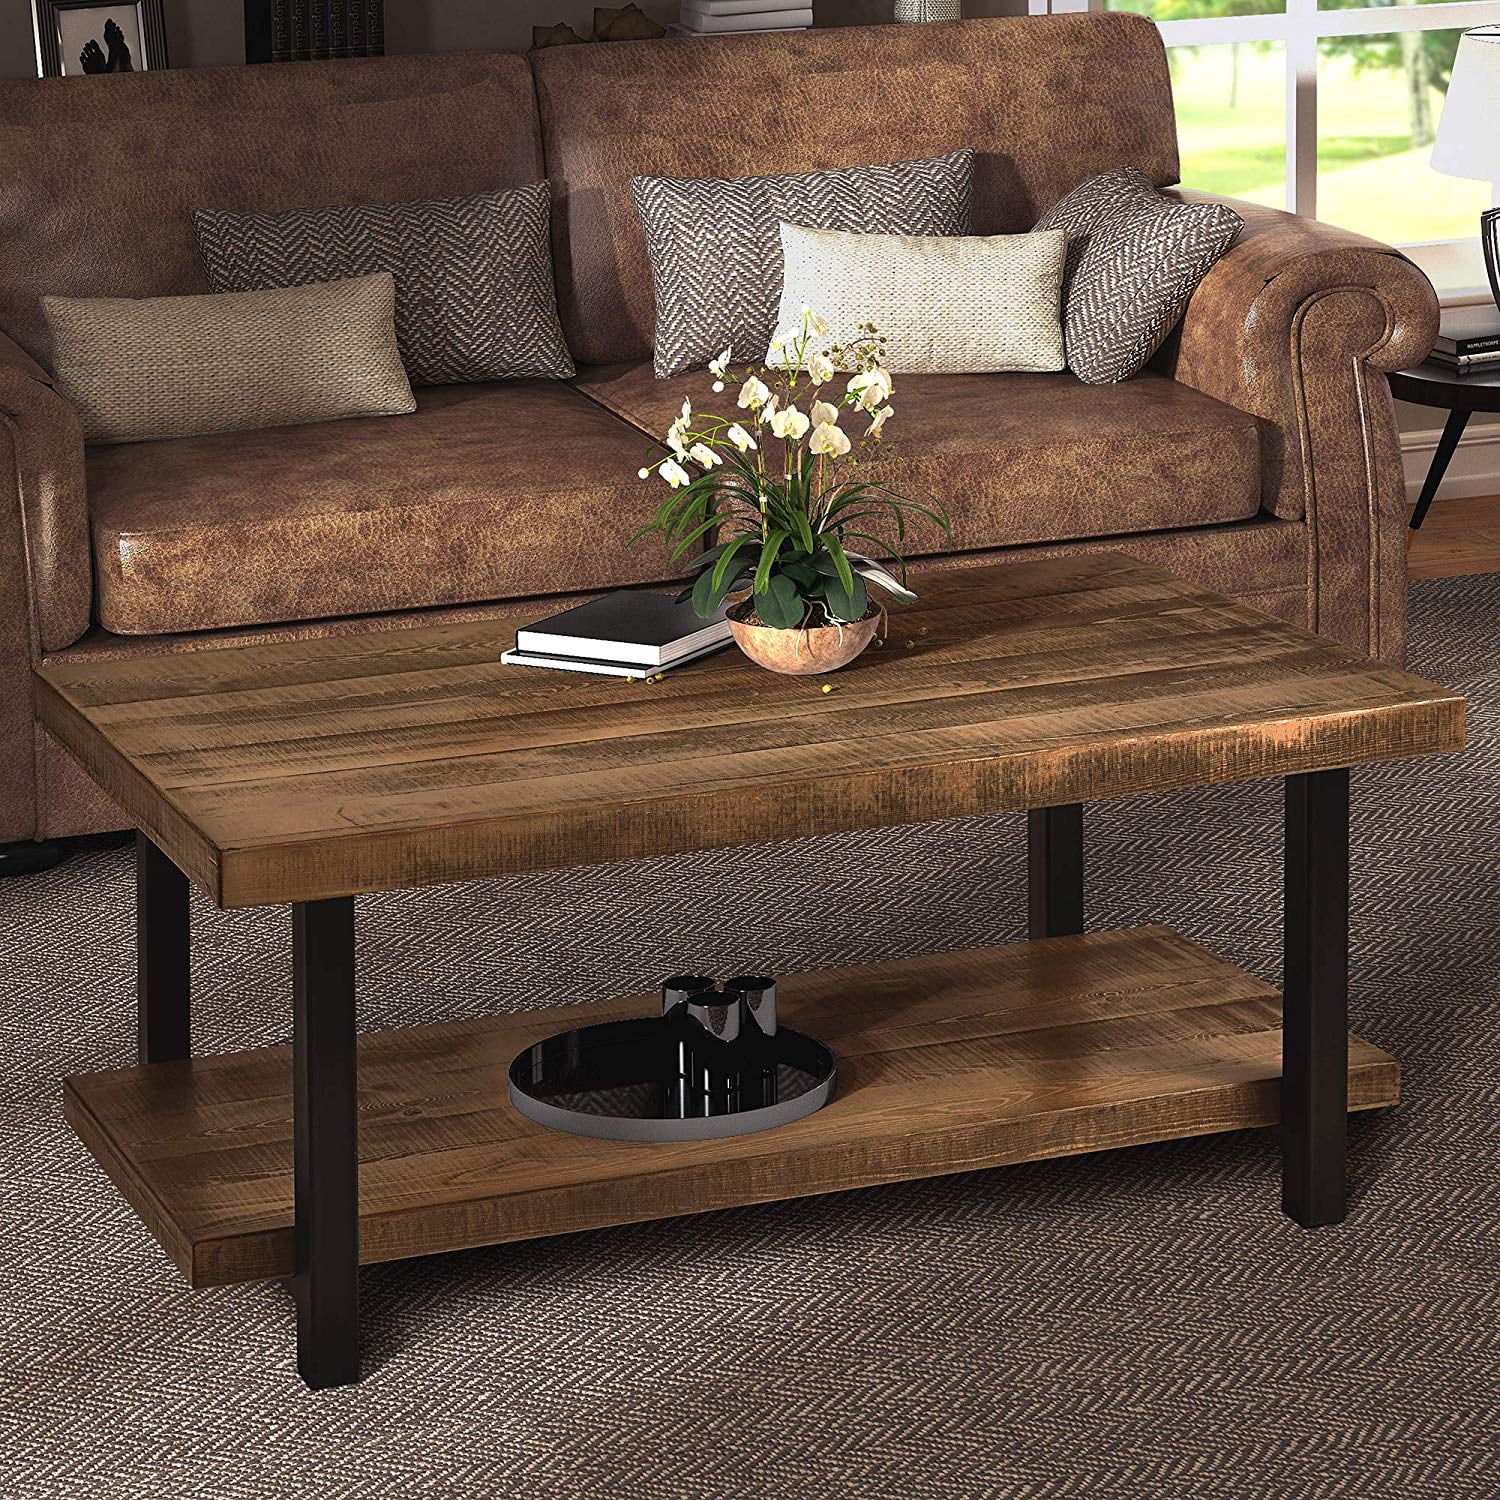 Harper&bright Designs Industrial Rectangular Pine Wood Coffee Table Inside Brown Rustic Coffee Tables (View 8 of 15)